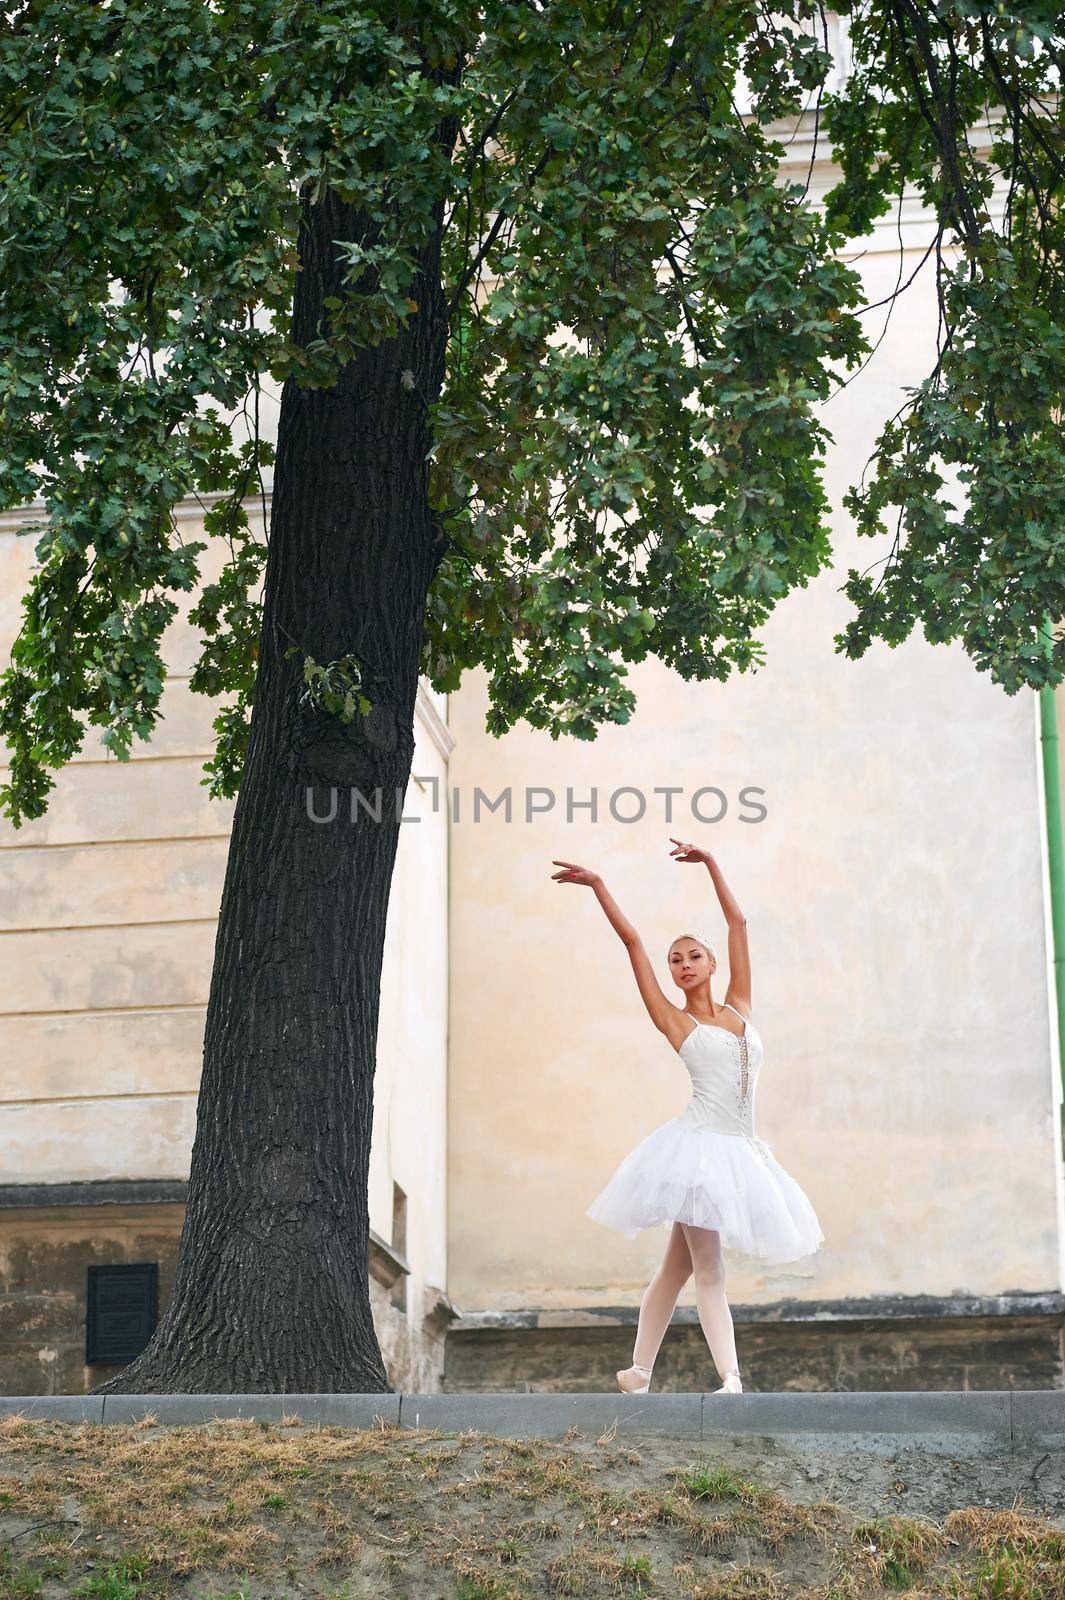 Beautiful graceful ballerina dancing on the streets of an old ci by SerhiiBobyk